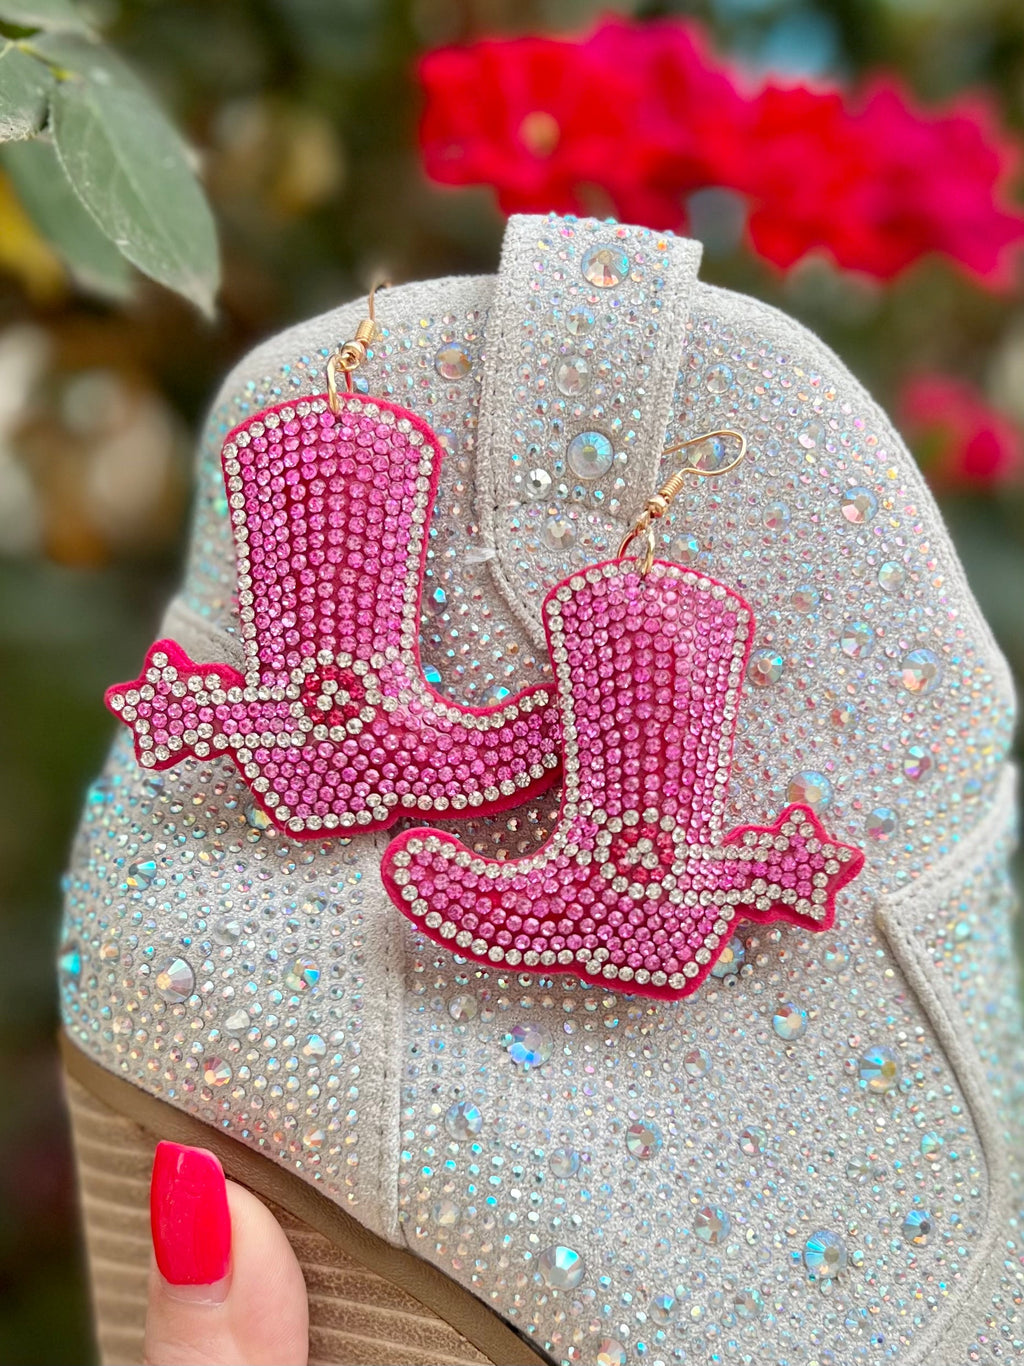 Giddy up with our Pink Puffed Up Boot Earrings! Crafted from pink Velveteen material with rhinestone inlay on the spur and spur strap, these unique accessories will spruce up any outfit. Add that final touch with the shimmering fish hook and puffed design, matched perfectly with a wink and a smile. Ride off into the sunset! 2" in length